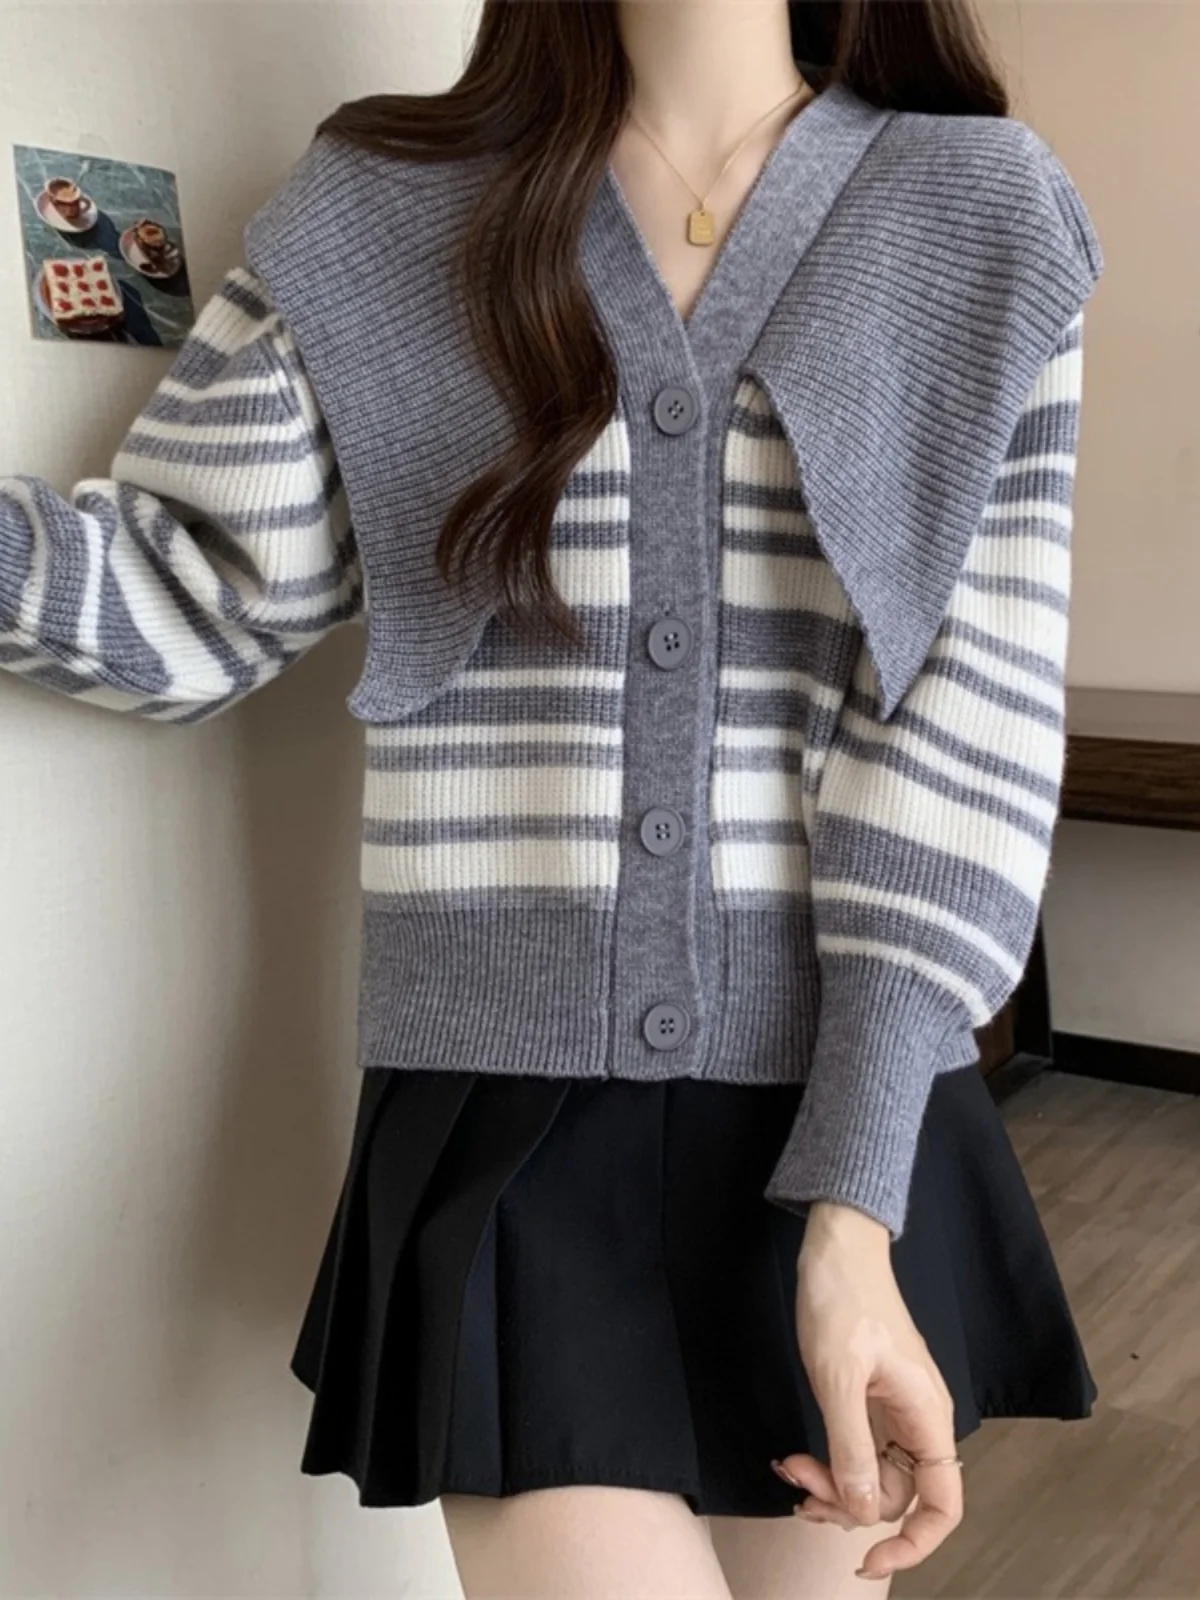 

Fashion Design Women Knitshirts Oversized All-matched V Neck Contrast Color Long Sleeve Cardigans Tops Leisure Striped Sweater